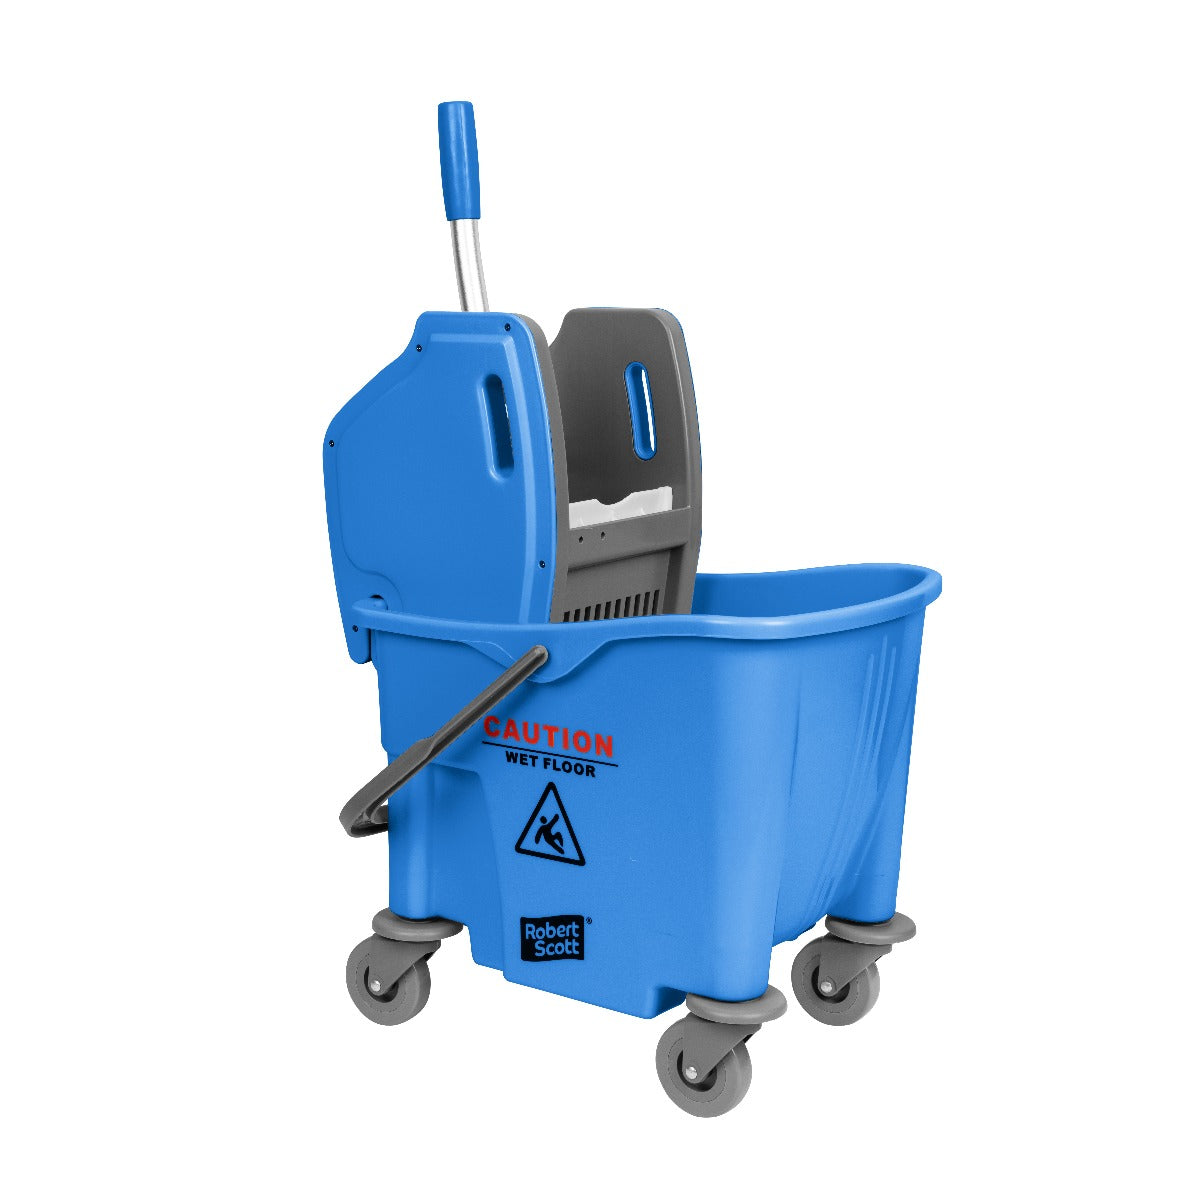 Purely Smile Kentucky Mop Bucket and Wringer 25 Litre Blue